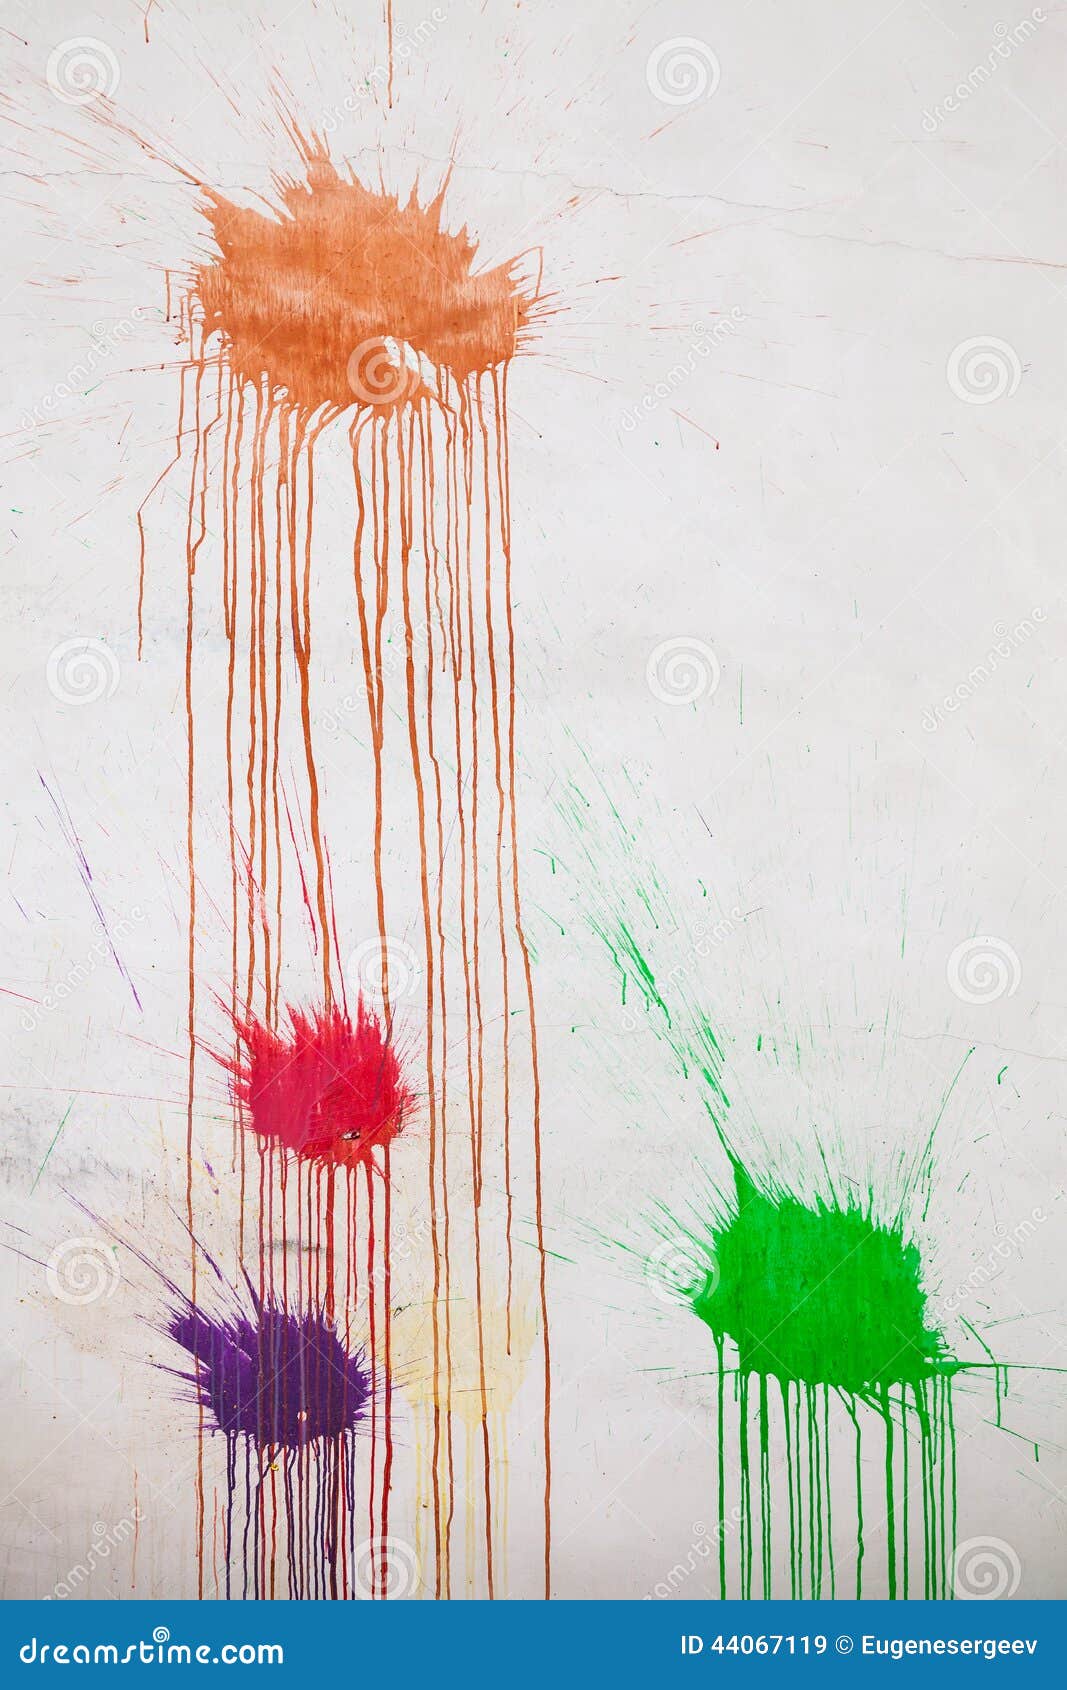 Abstract Background Colorful Paint Splashes On Wall Stock Image